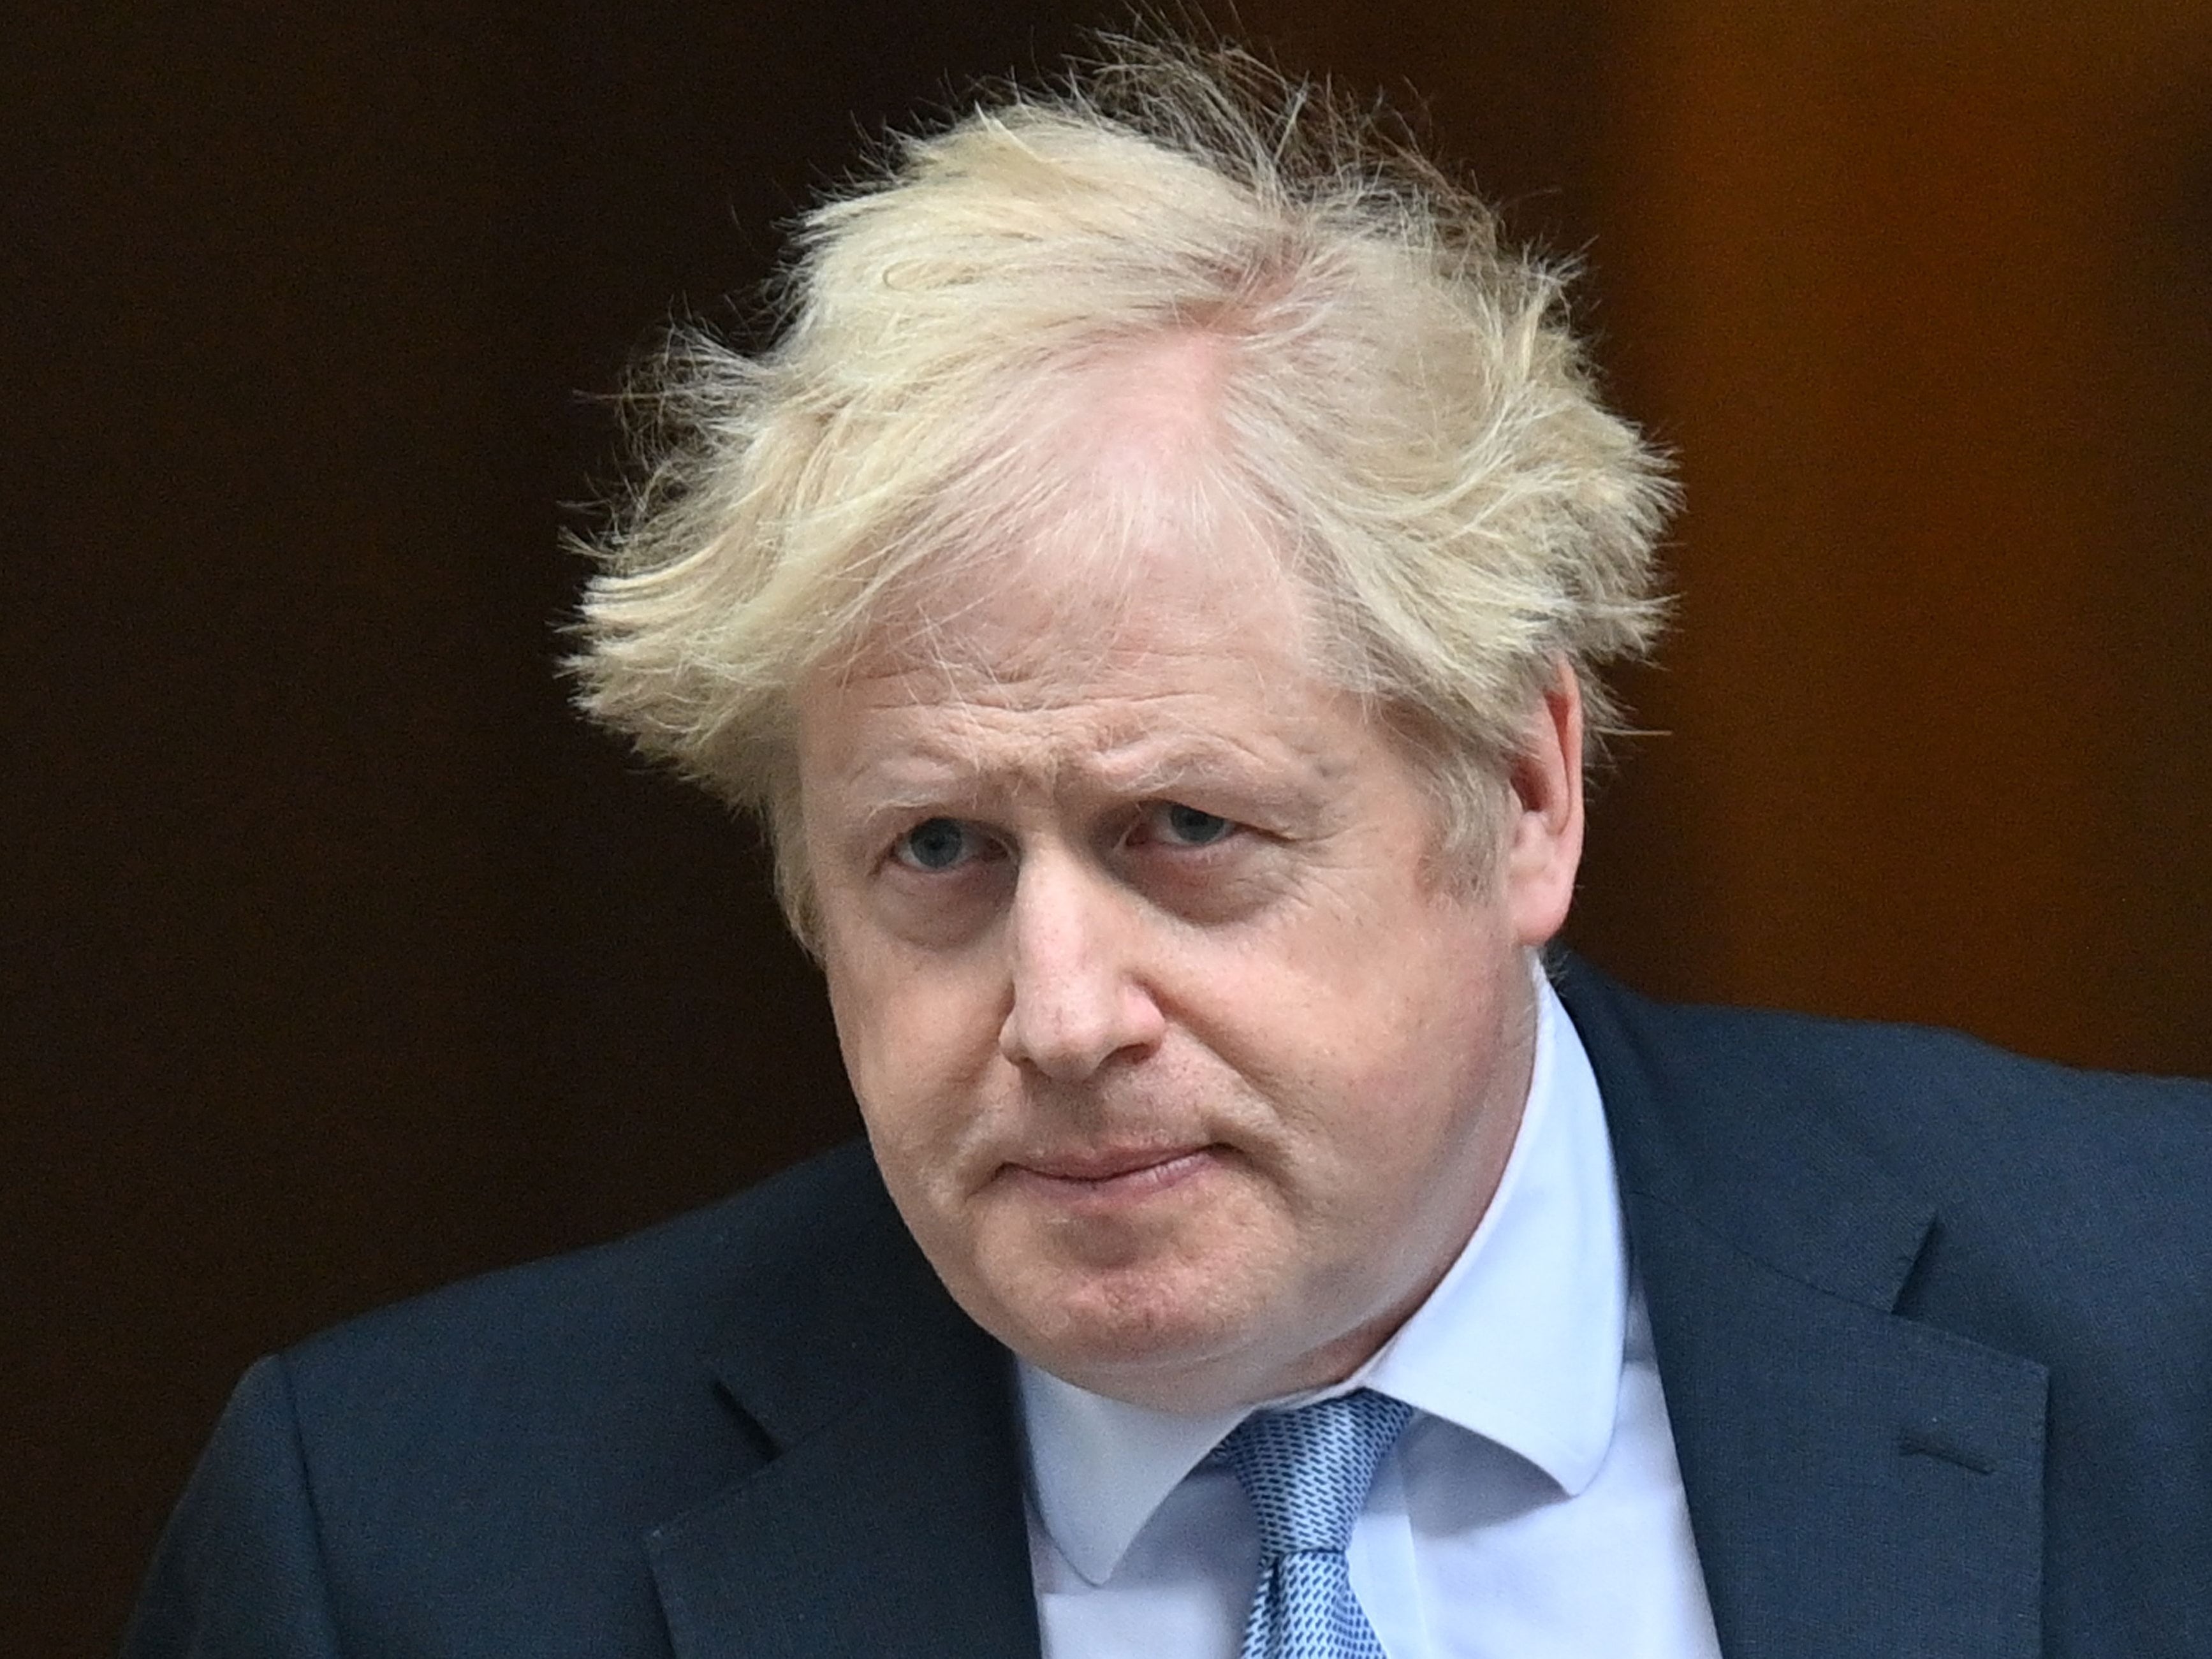 Boris Johnson said the government didn’t know Covid could be transmitted asymptomatically